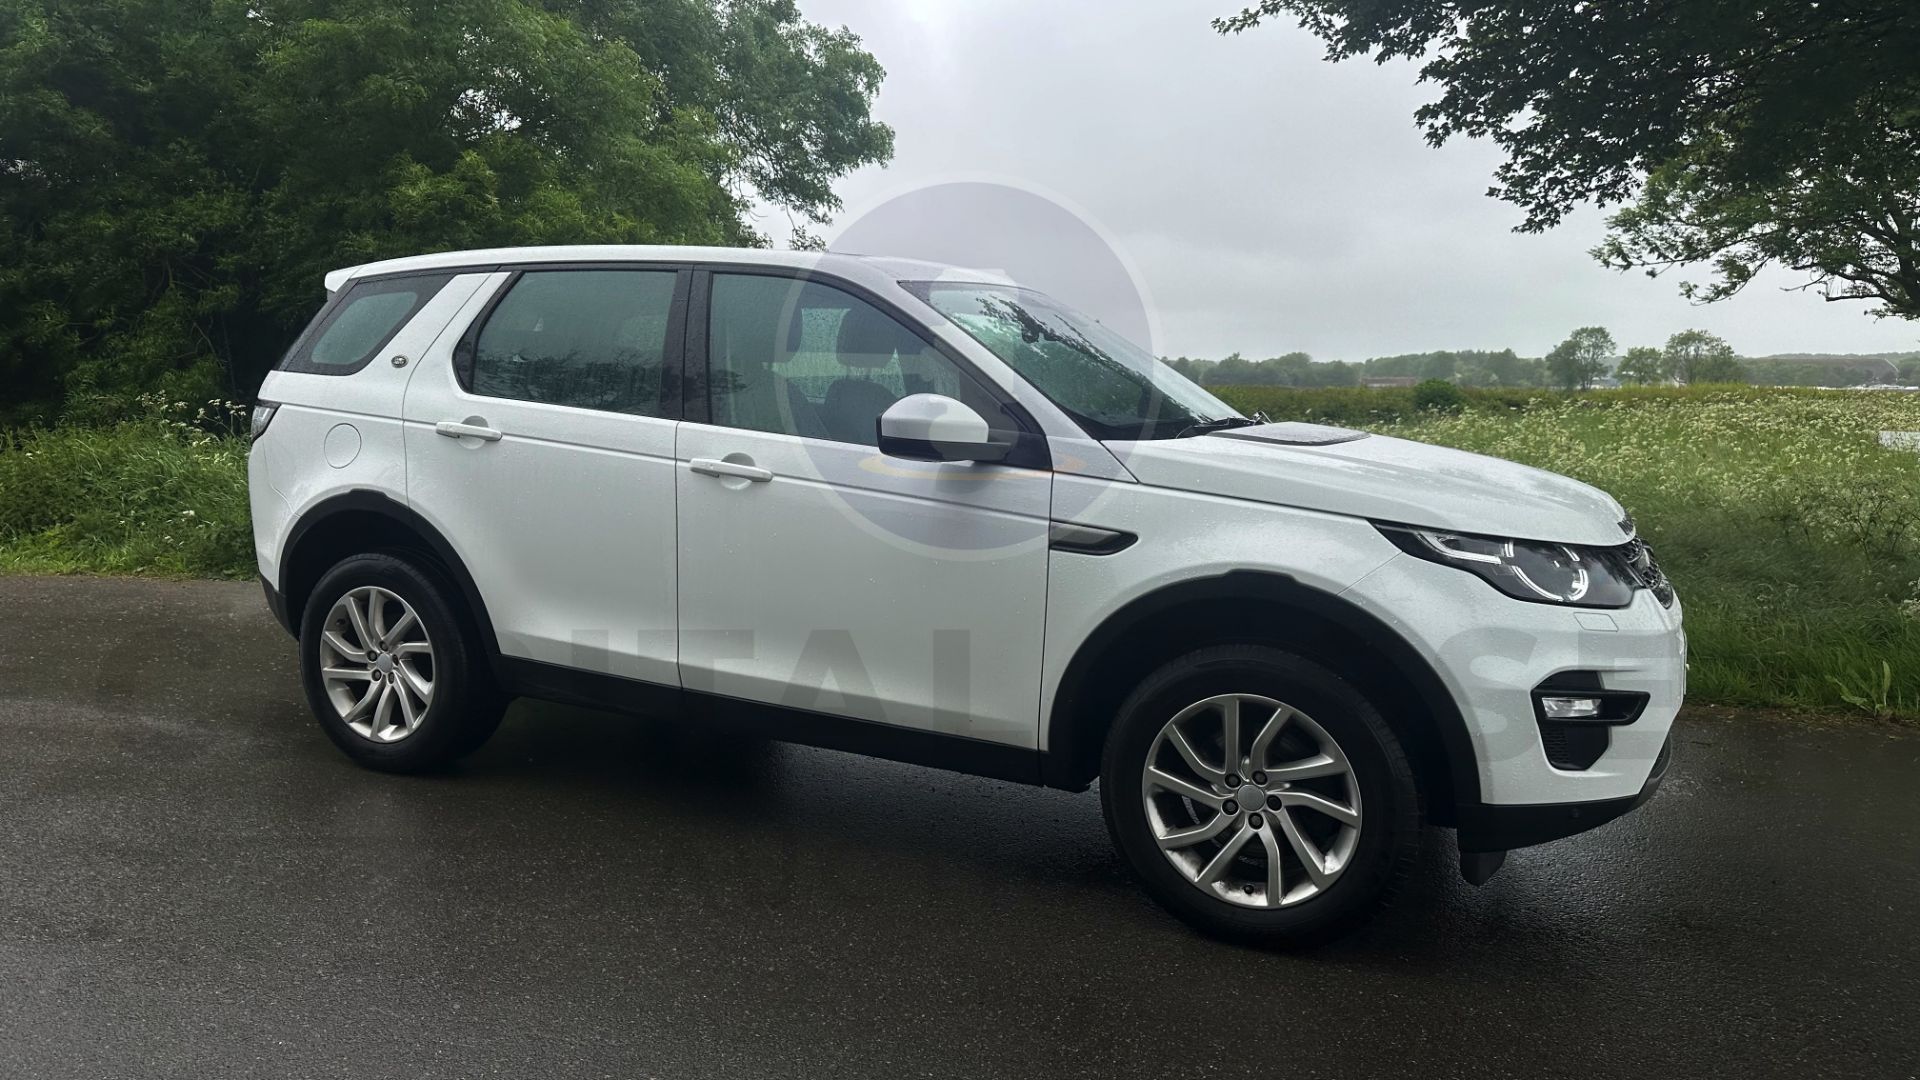 (On Sale) LAND ROVER DISCOVERY SPORT *SE TECH* 7 SEATER (66 REG - EURO 6) 2.0 TD4 - AUTO *HUGE SPEC*